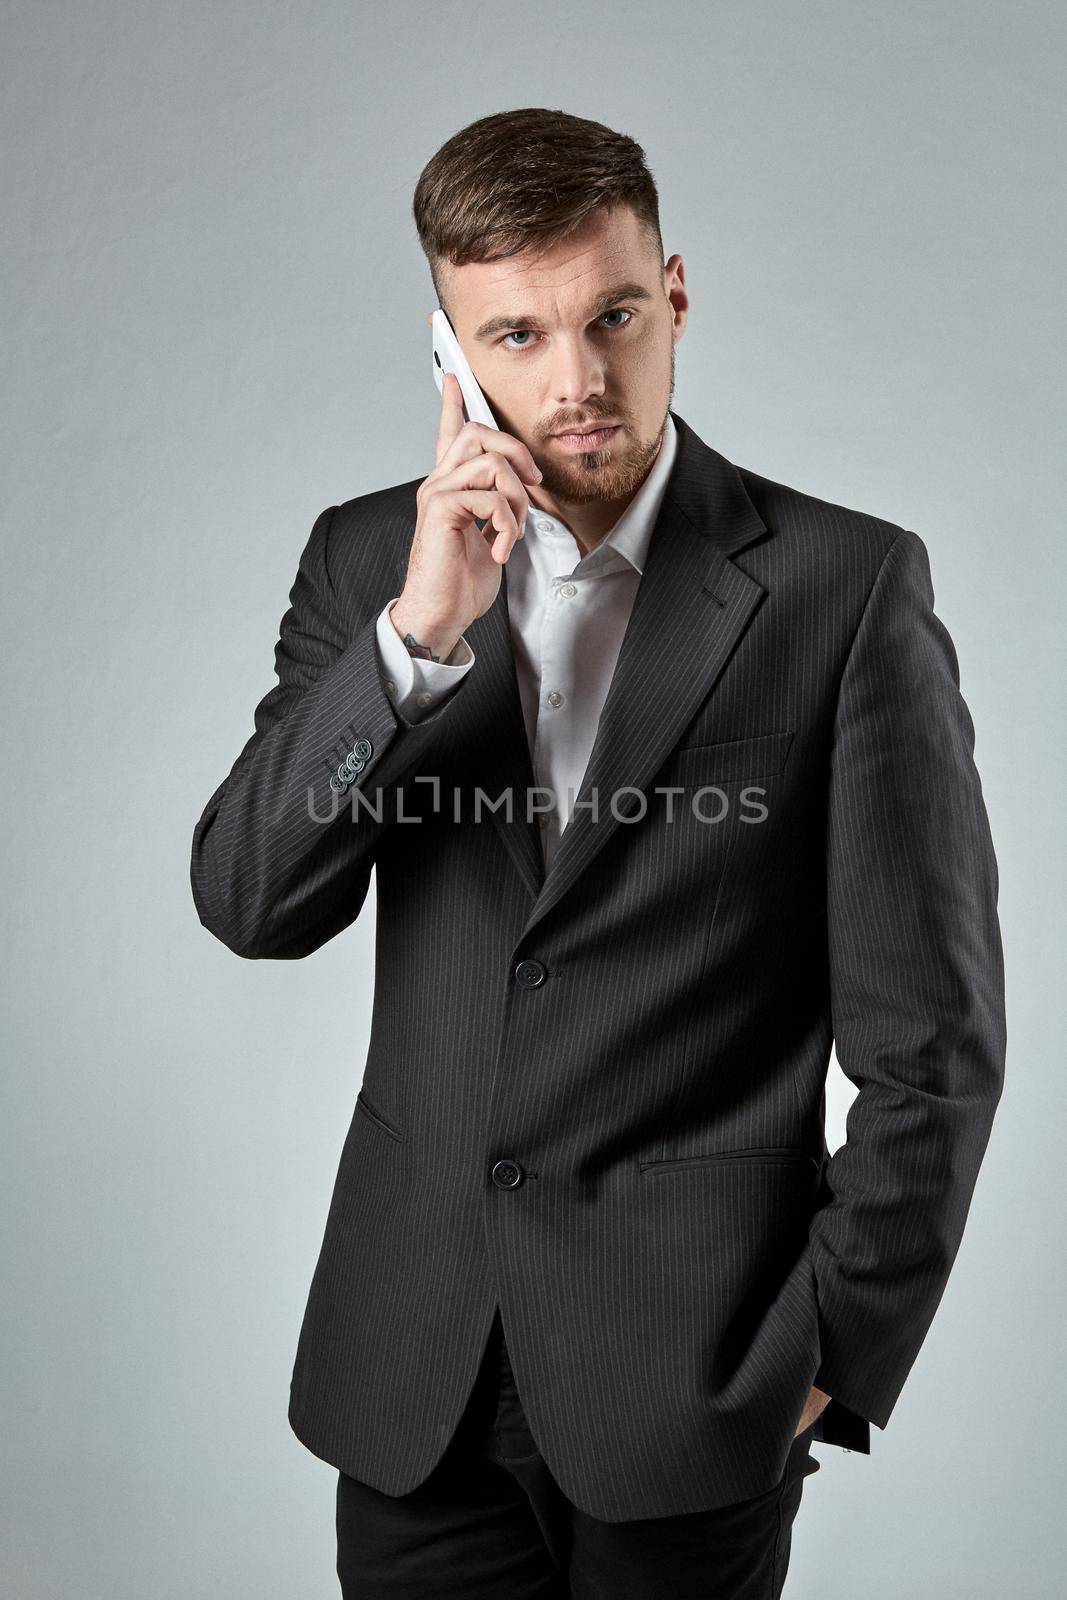 Portrait of a handsome businessman making a phone call against a grey background. Emotions. A man looks into the camera